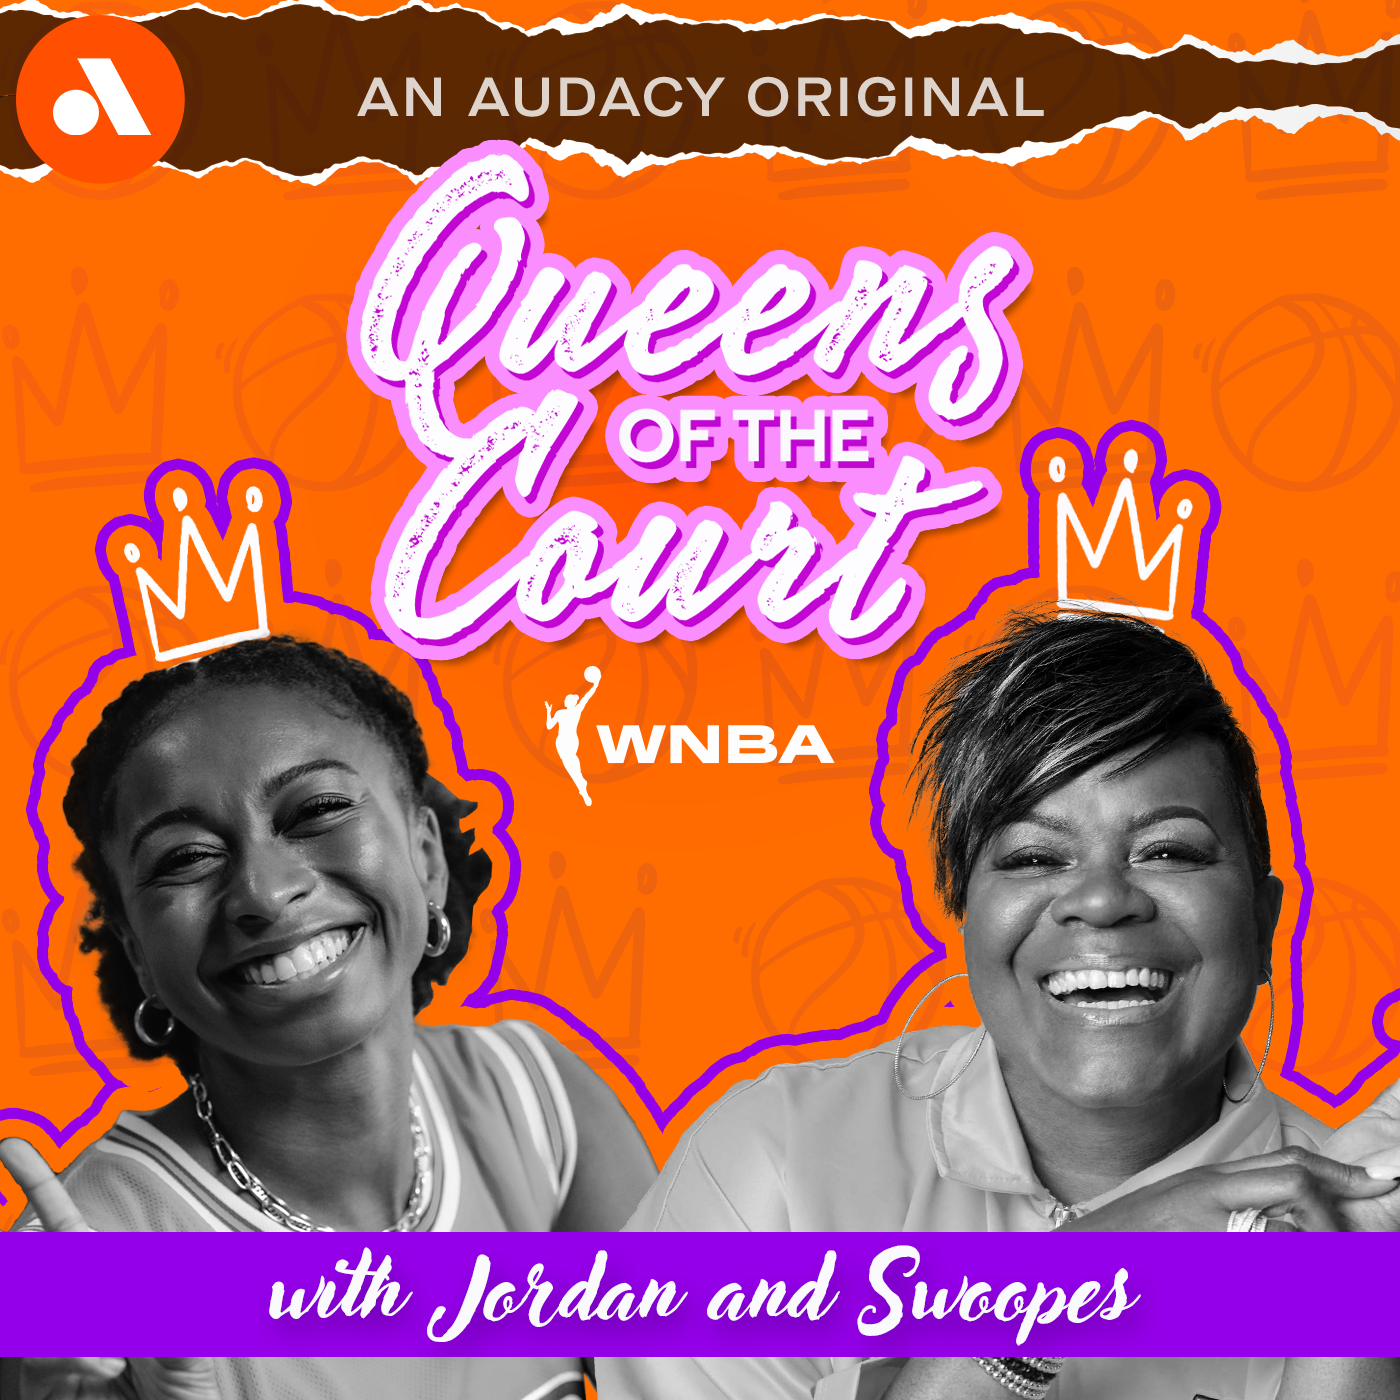  Audacy’s 2400Sports, WNBA Launch ‘Queens Of The Court With Jordan And Swoopes’ Podcast